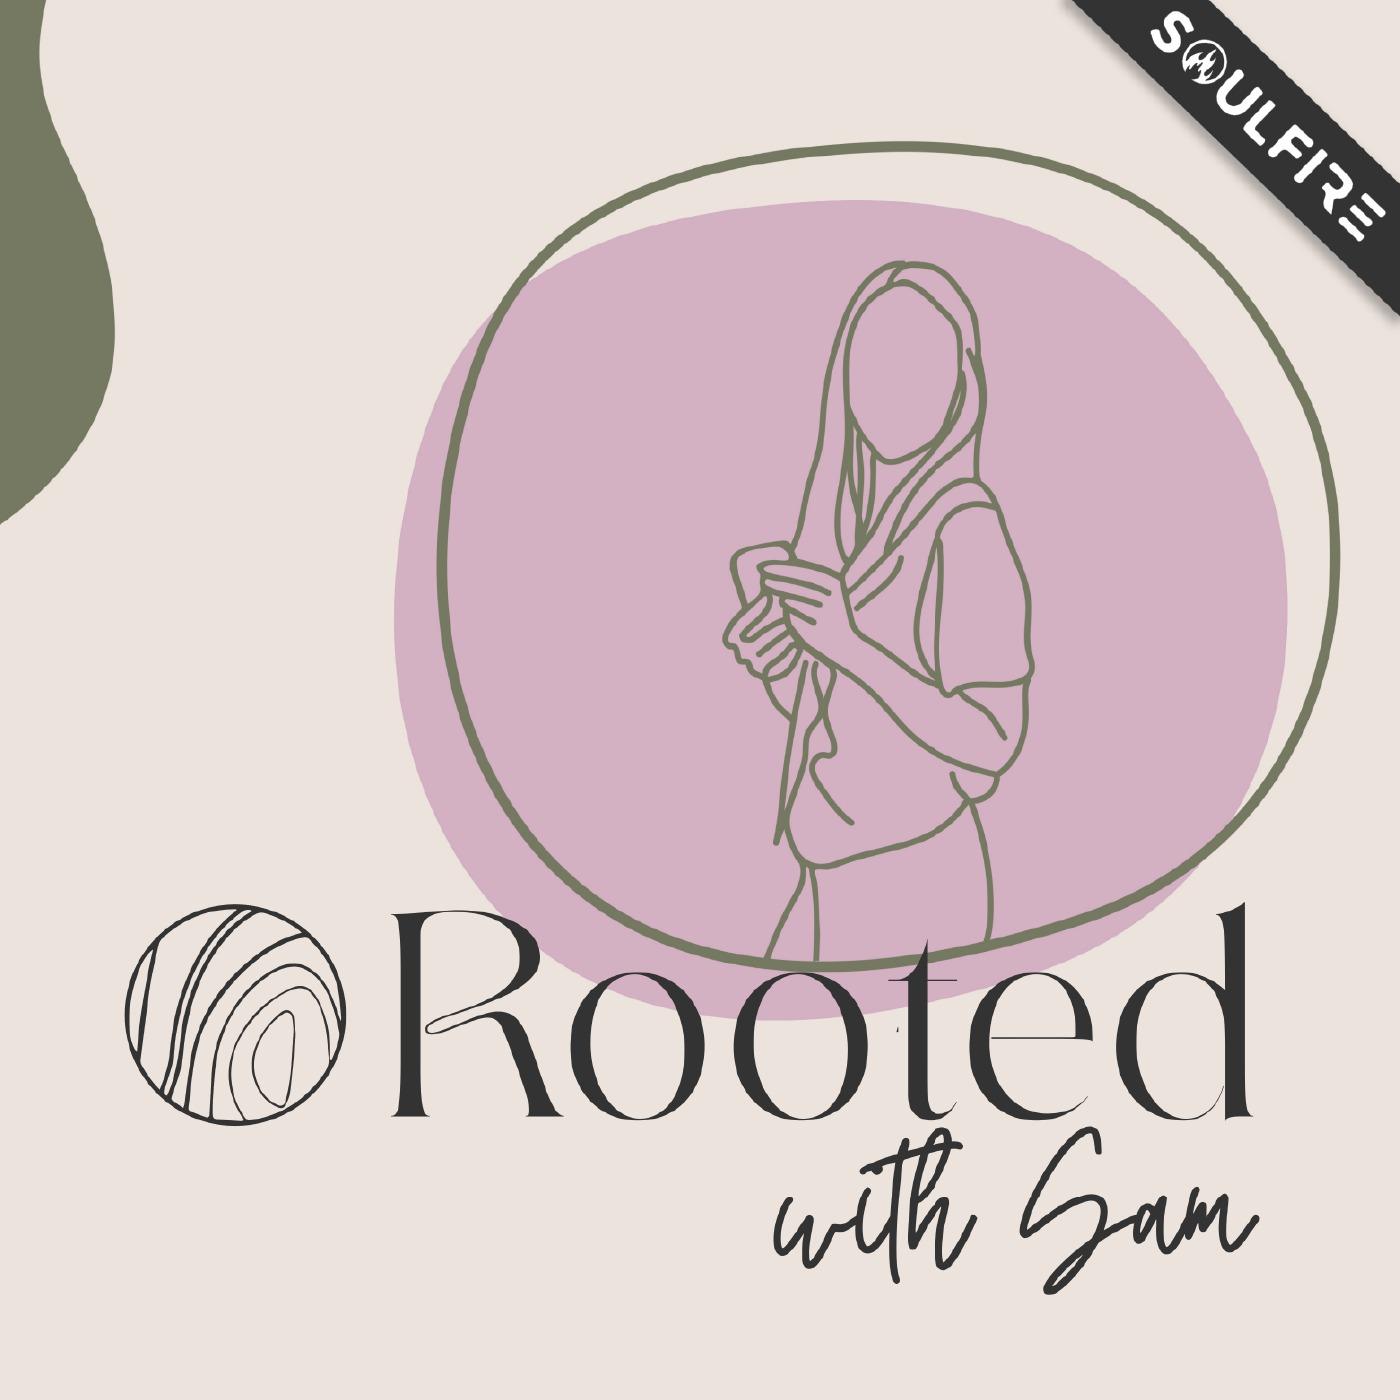 Rooted with Sam